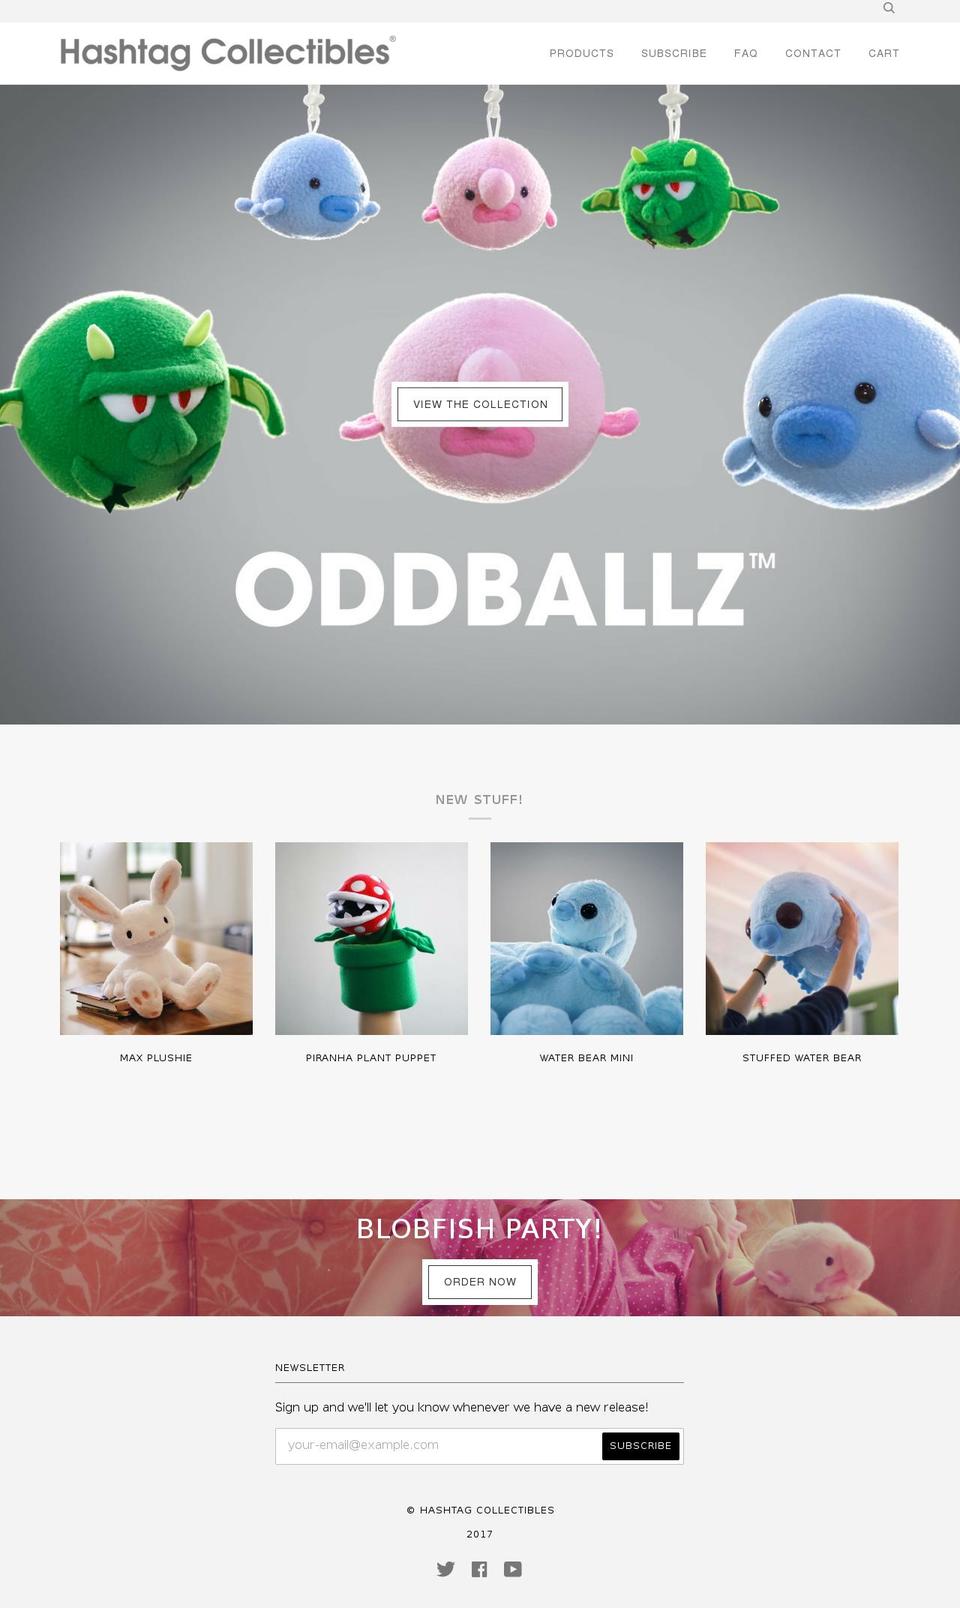 Pipeline Shopify theme site example hashtagcollectibles.com